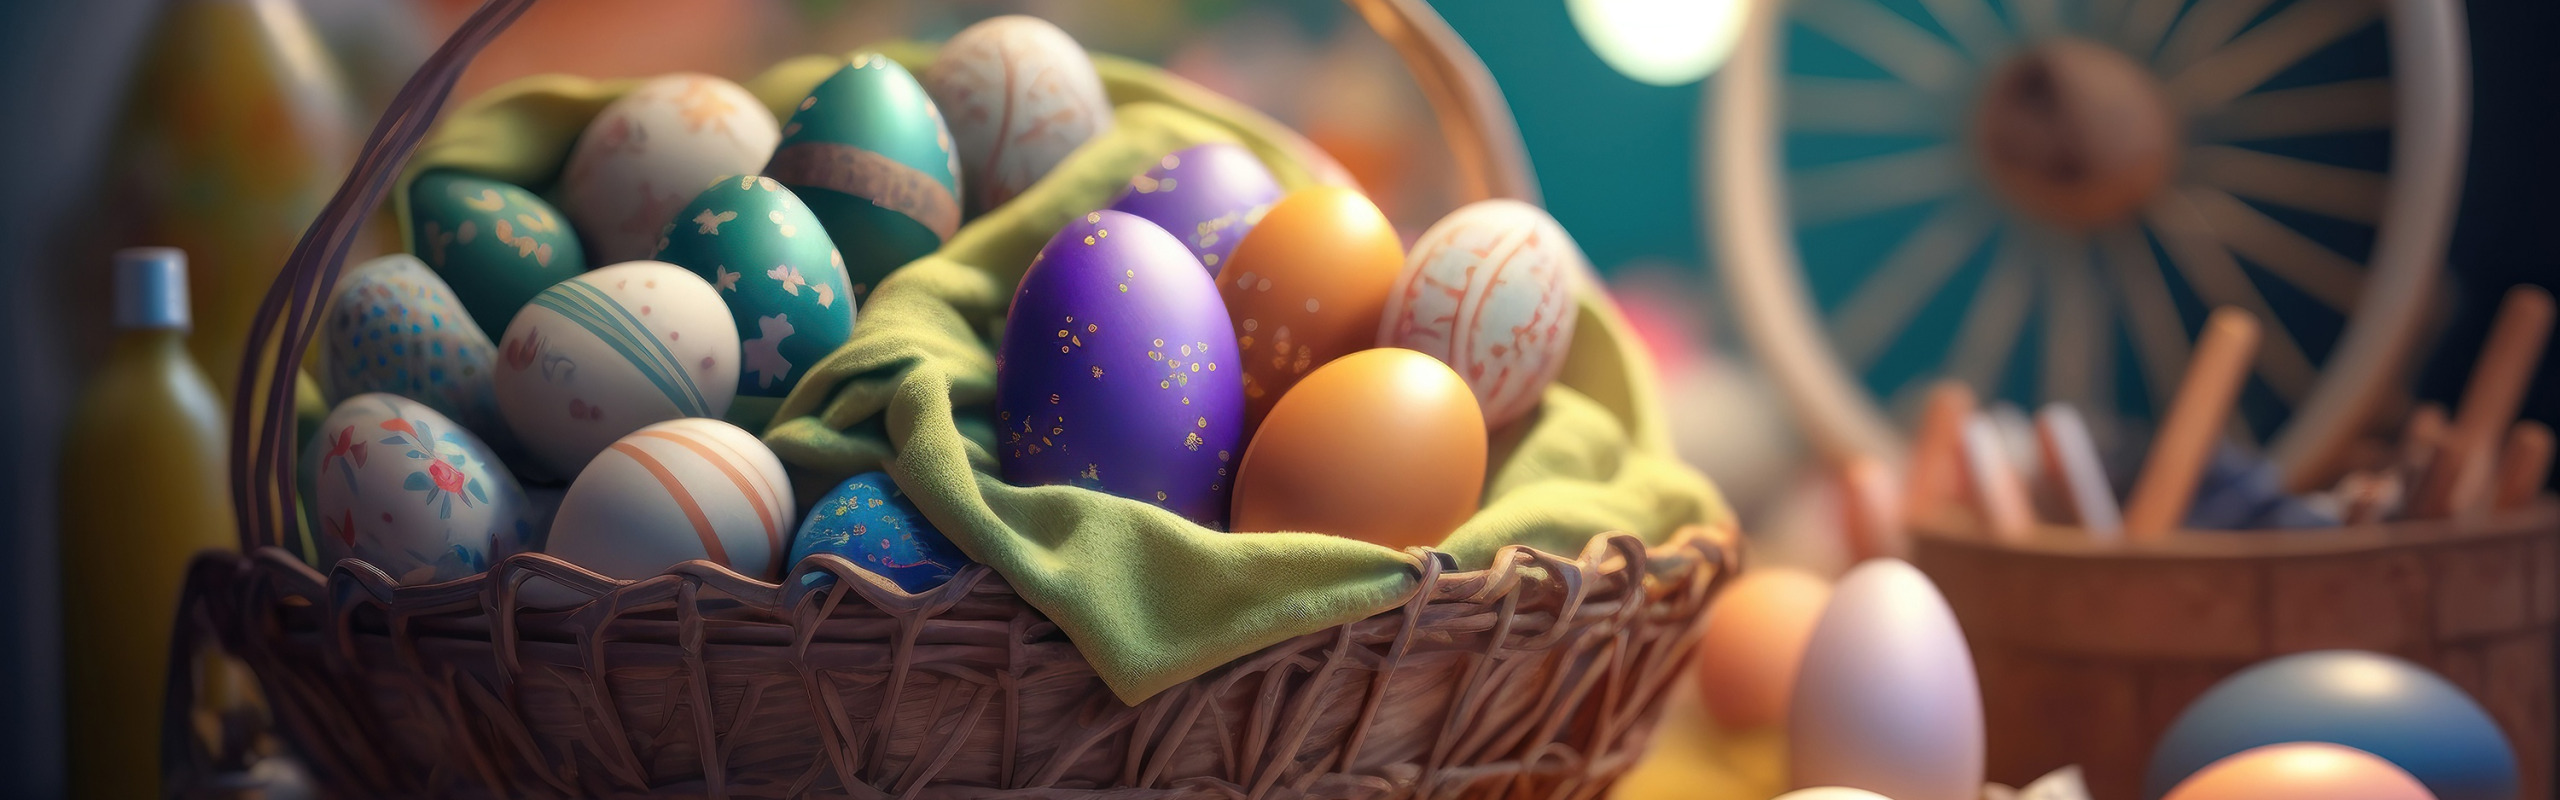 background, basket, eggs, colorful, Easter, happy, background, Easter